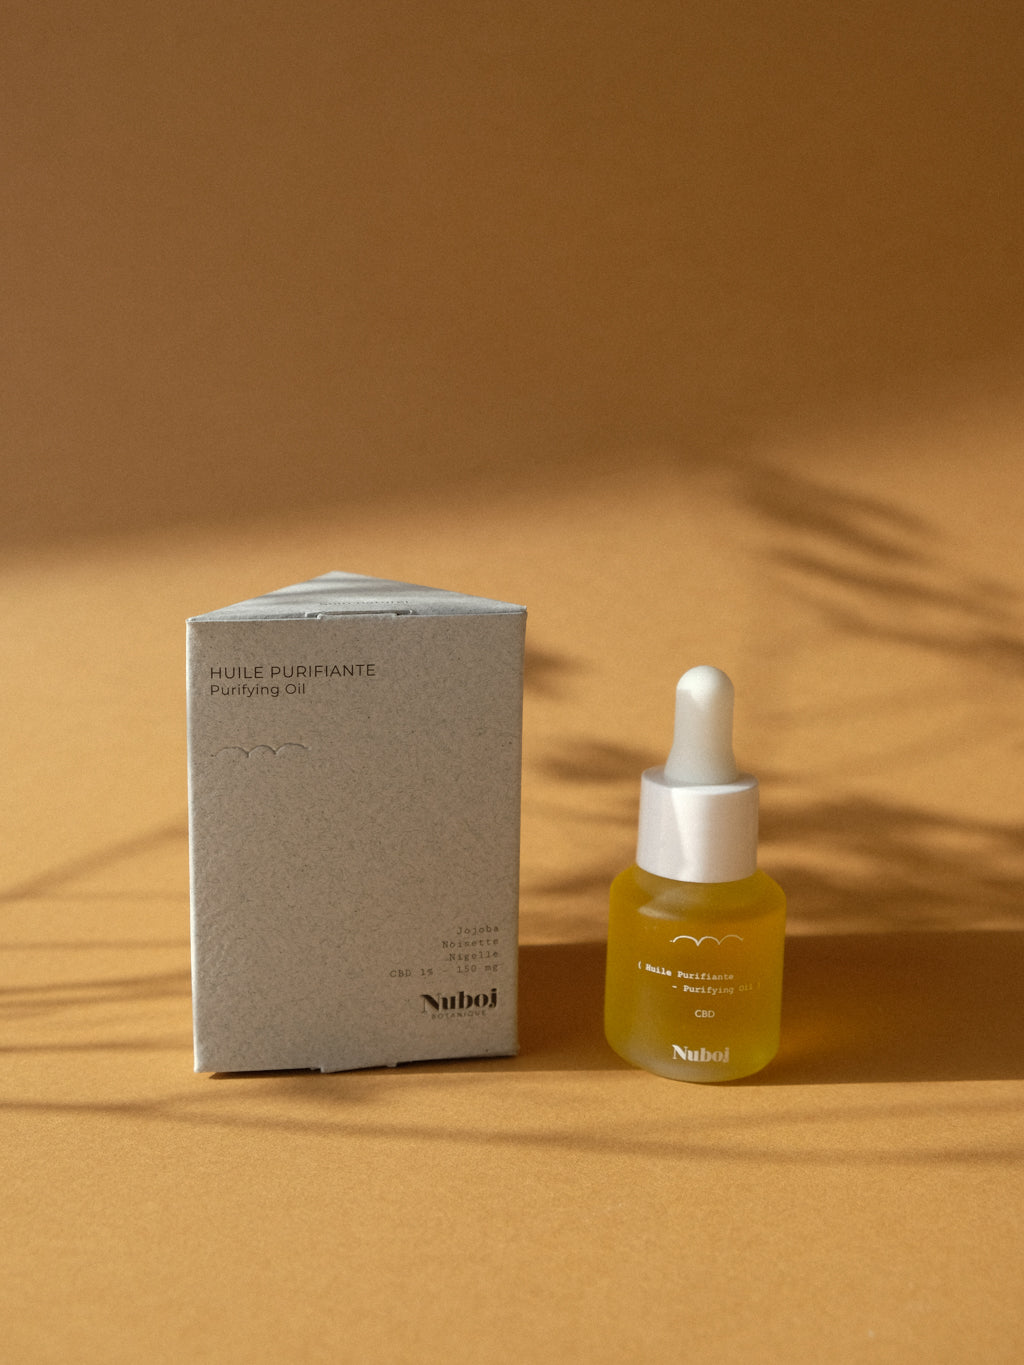 Nuboj - Purifying Face Oil With CBD | Inspiration Her